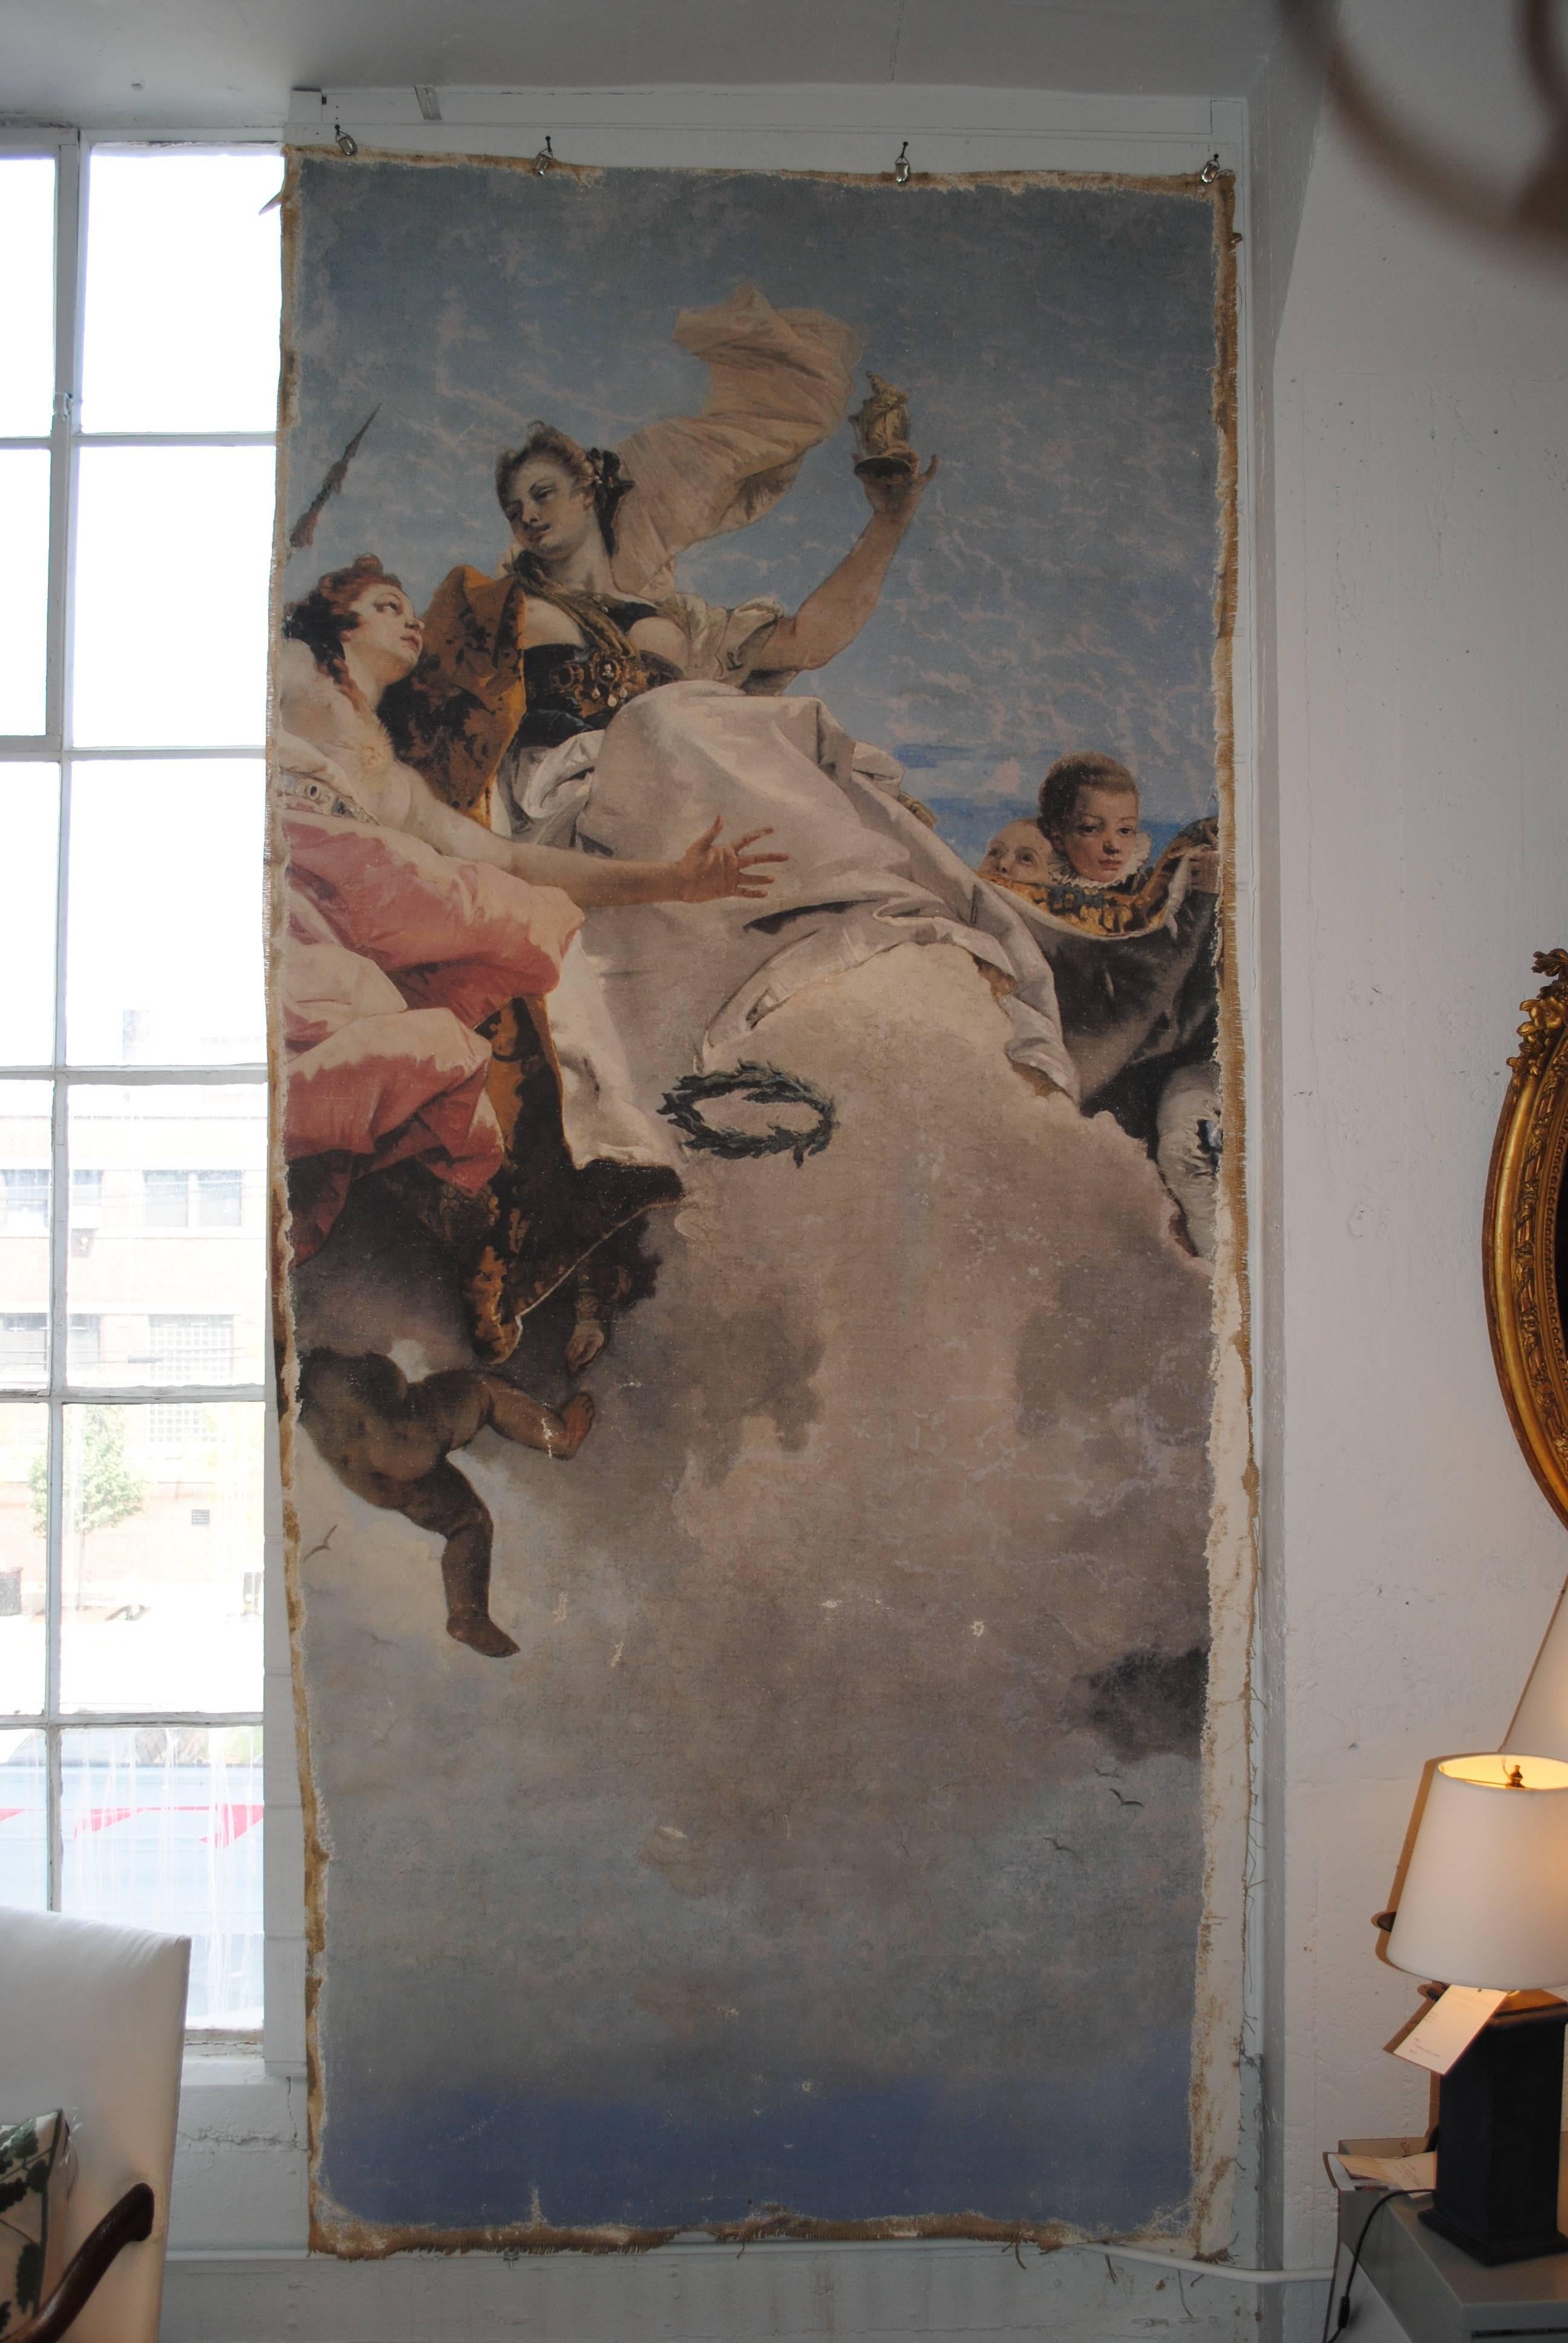 Large reproduction fresco print on gessoed burlap, inspired by the great Venetian painter Giovanni Battista Tiepolo. Wonderful wall decoration.

Fresco 